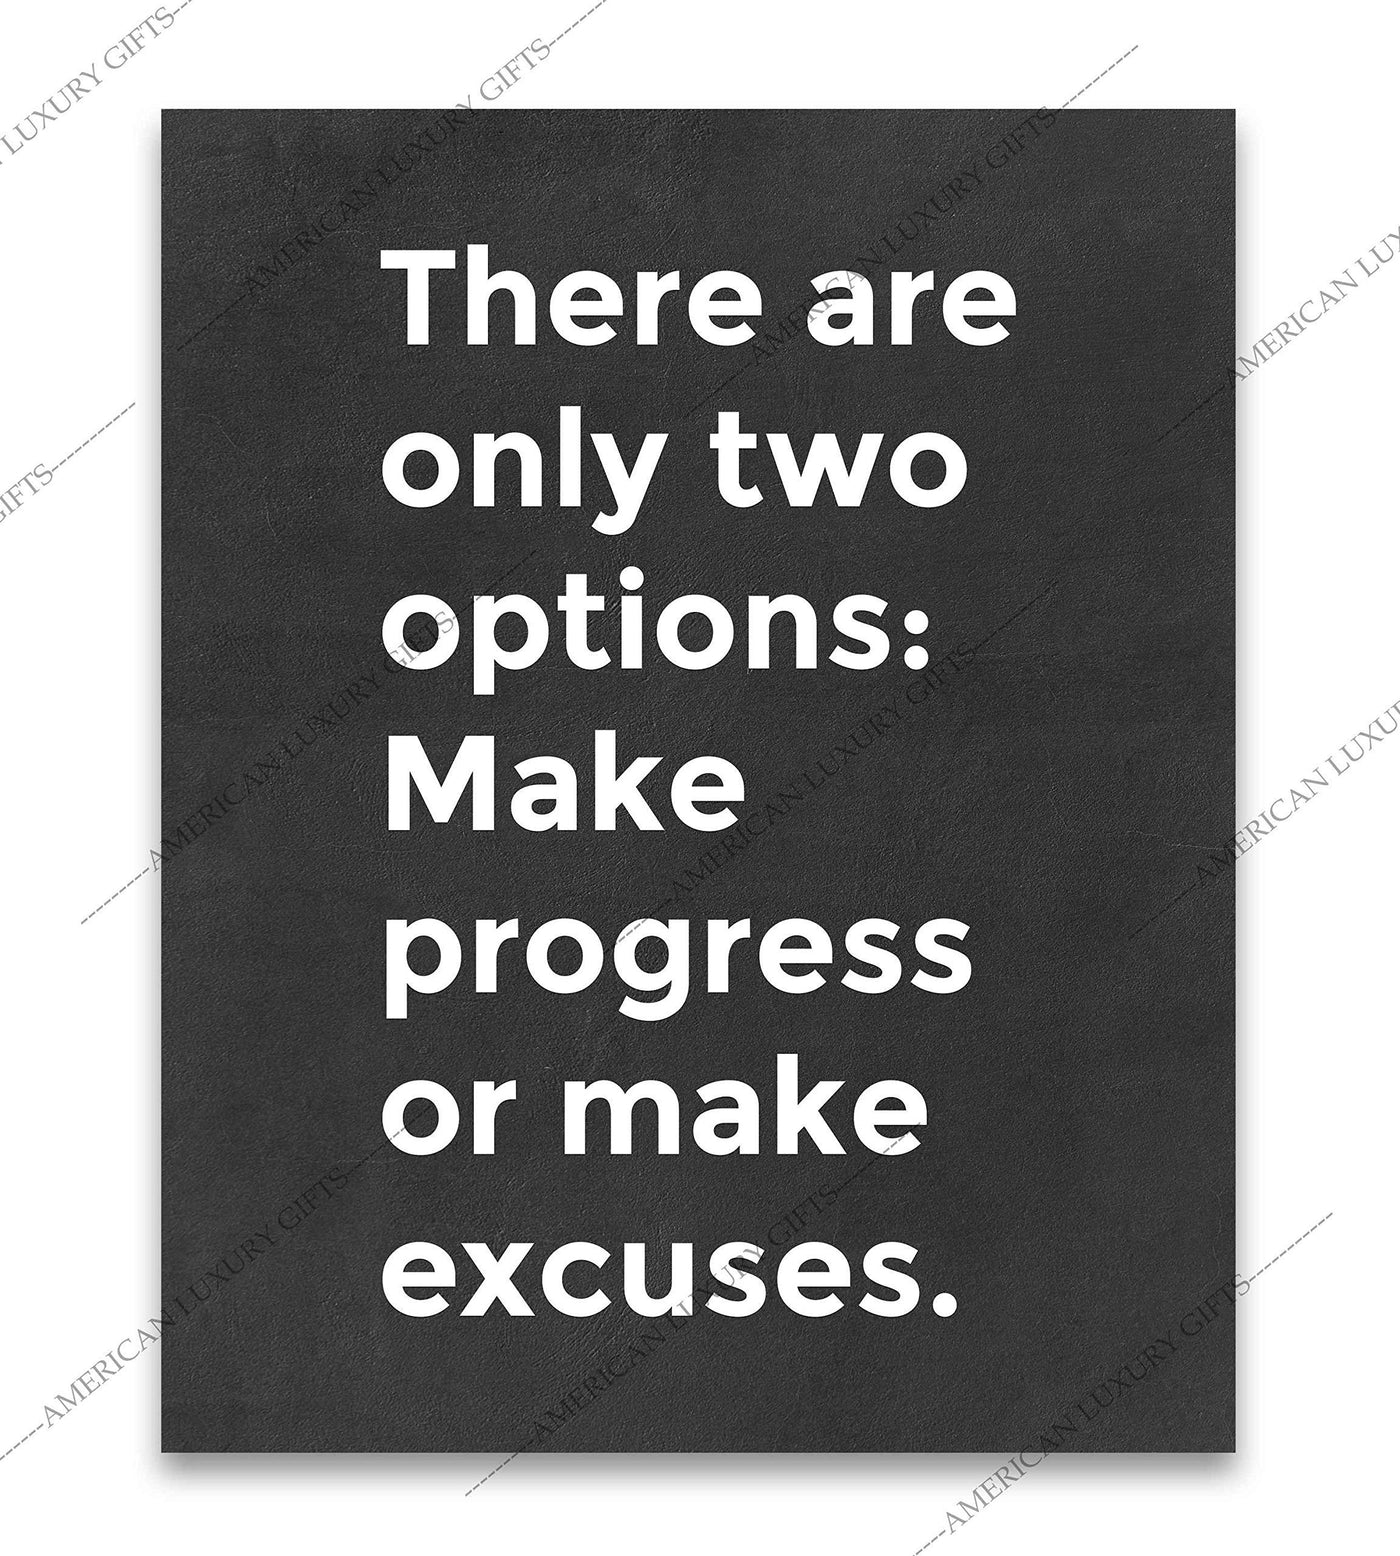 ?Only Two Options: Make Progress or Excuses? Motivational Quotes Wall Art -8 x 10" Modern Poster Print-Ready to Frame. Inspirational Decor for Home-Office-School-Gym. Great Sign for Motivation!